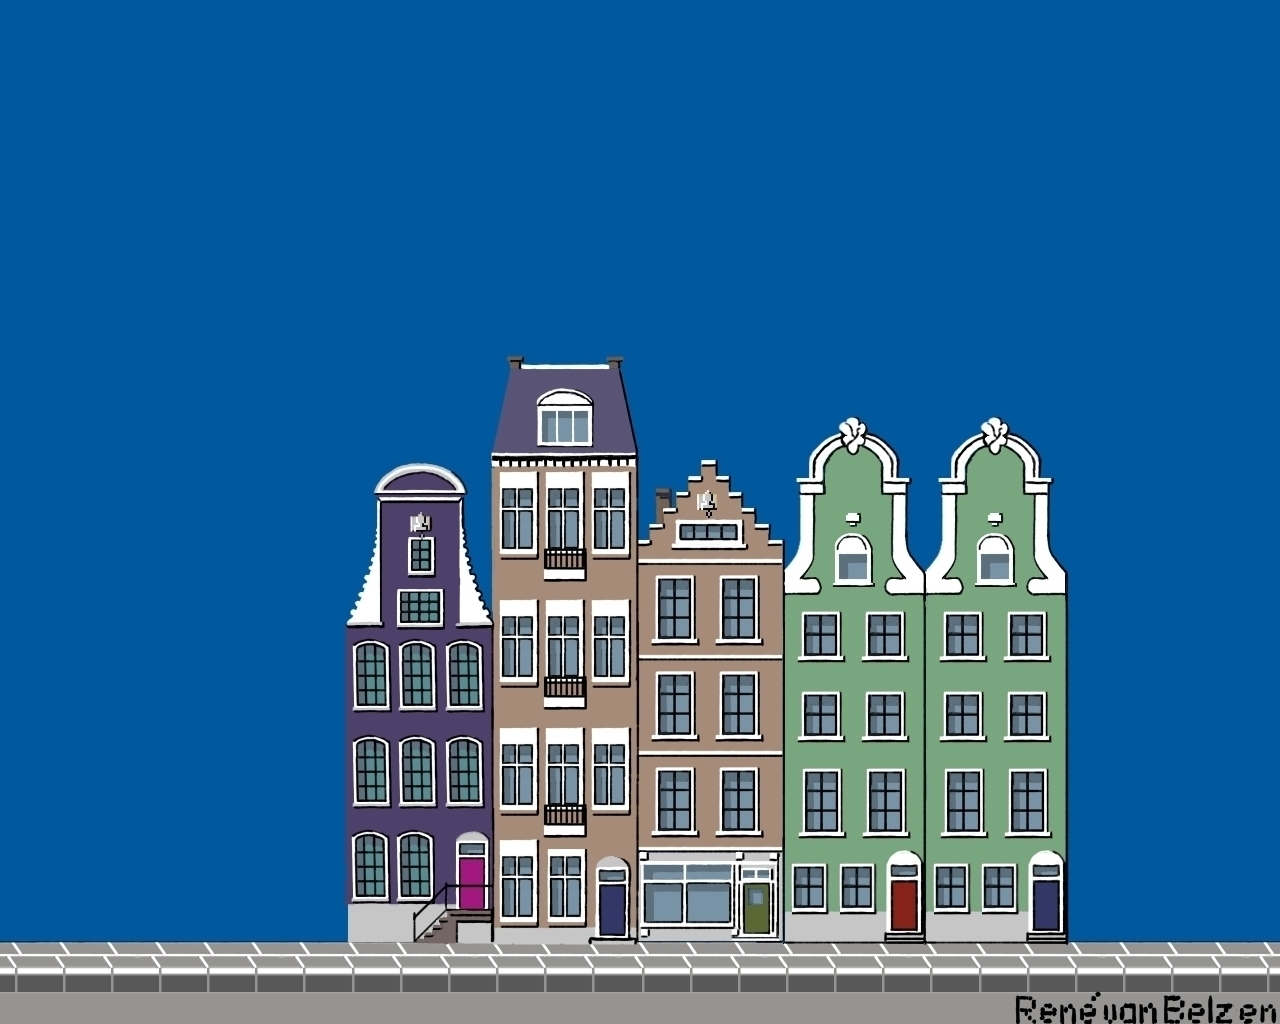 pixel art with merchant townhouses on a blue background